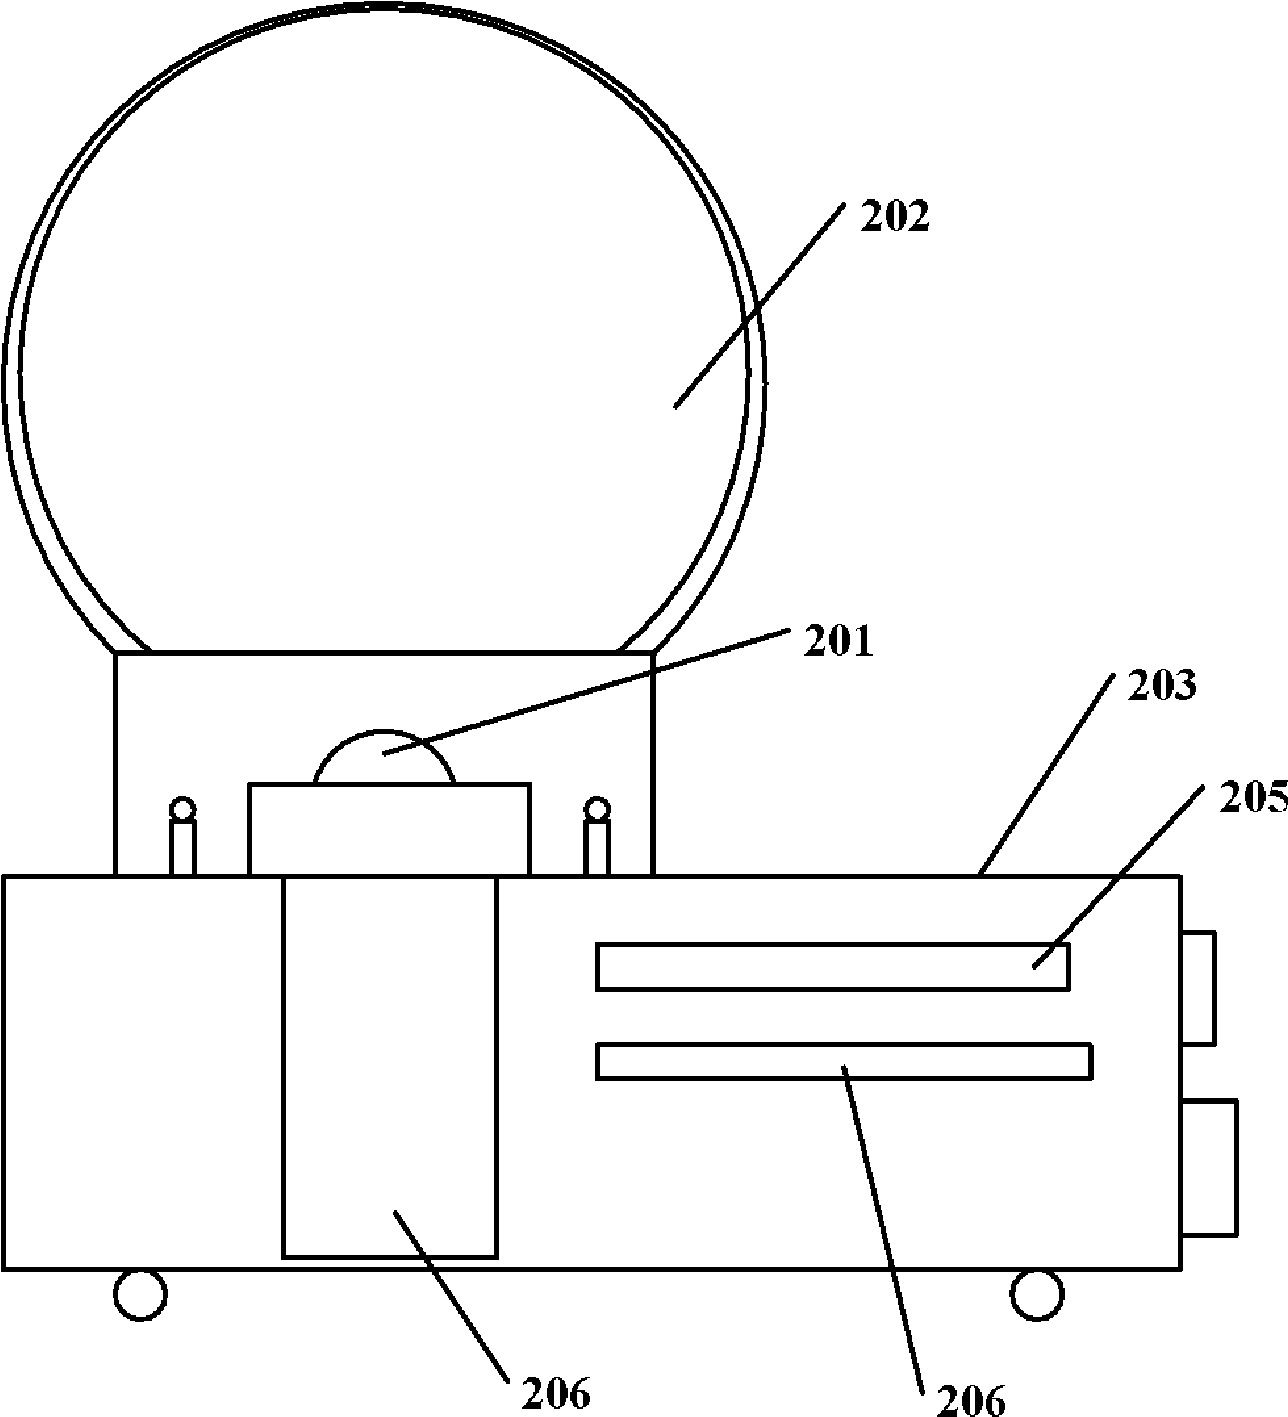 Projection device